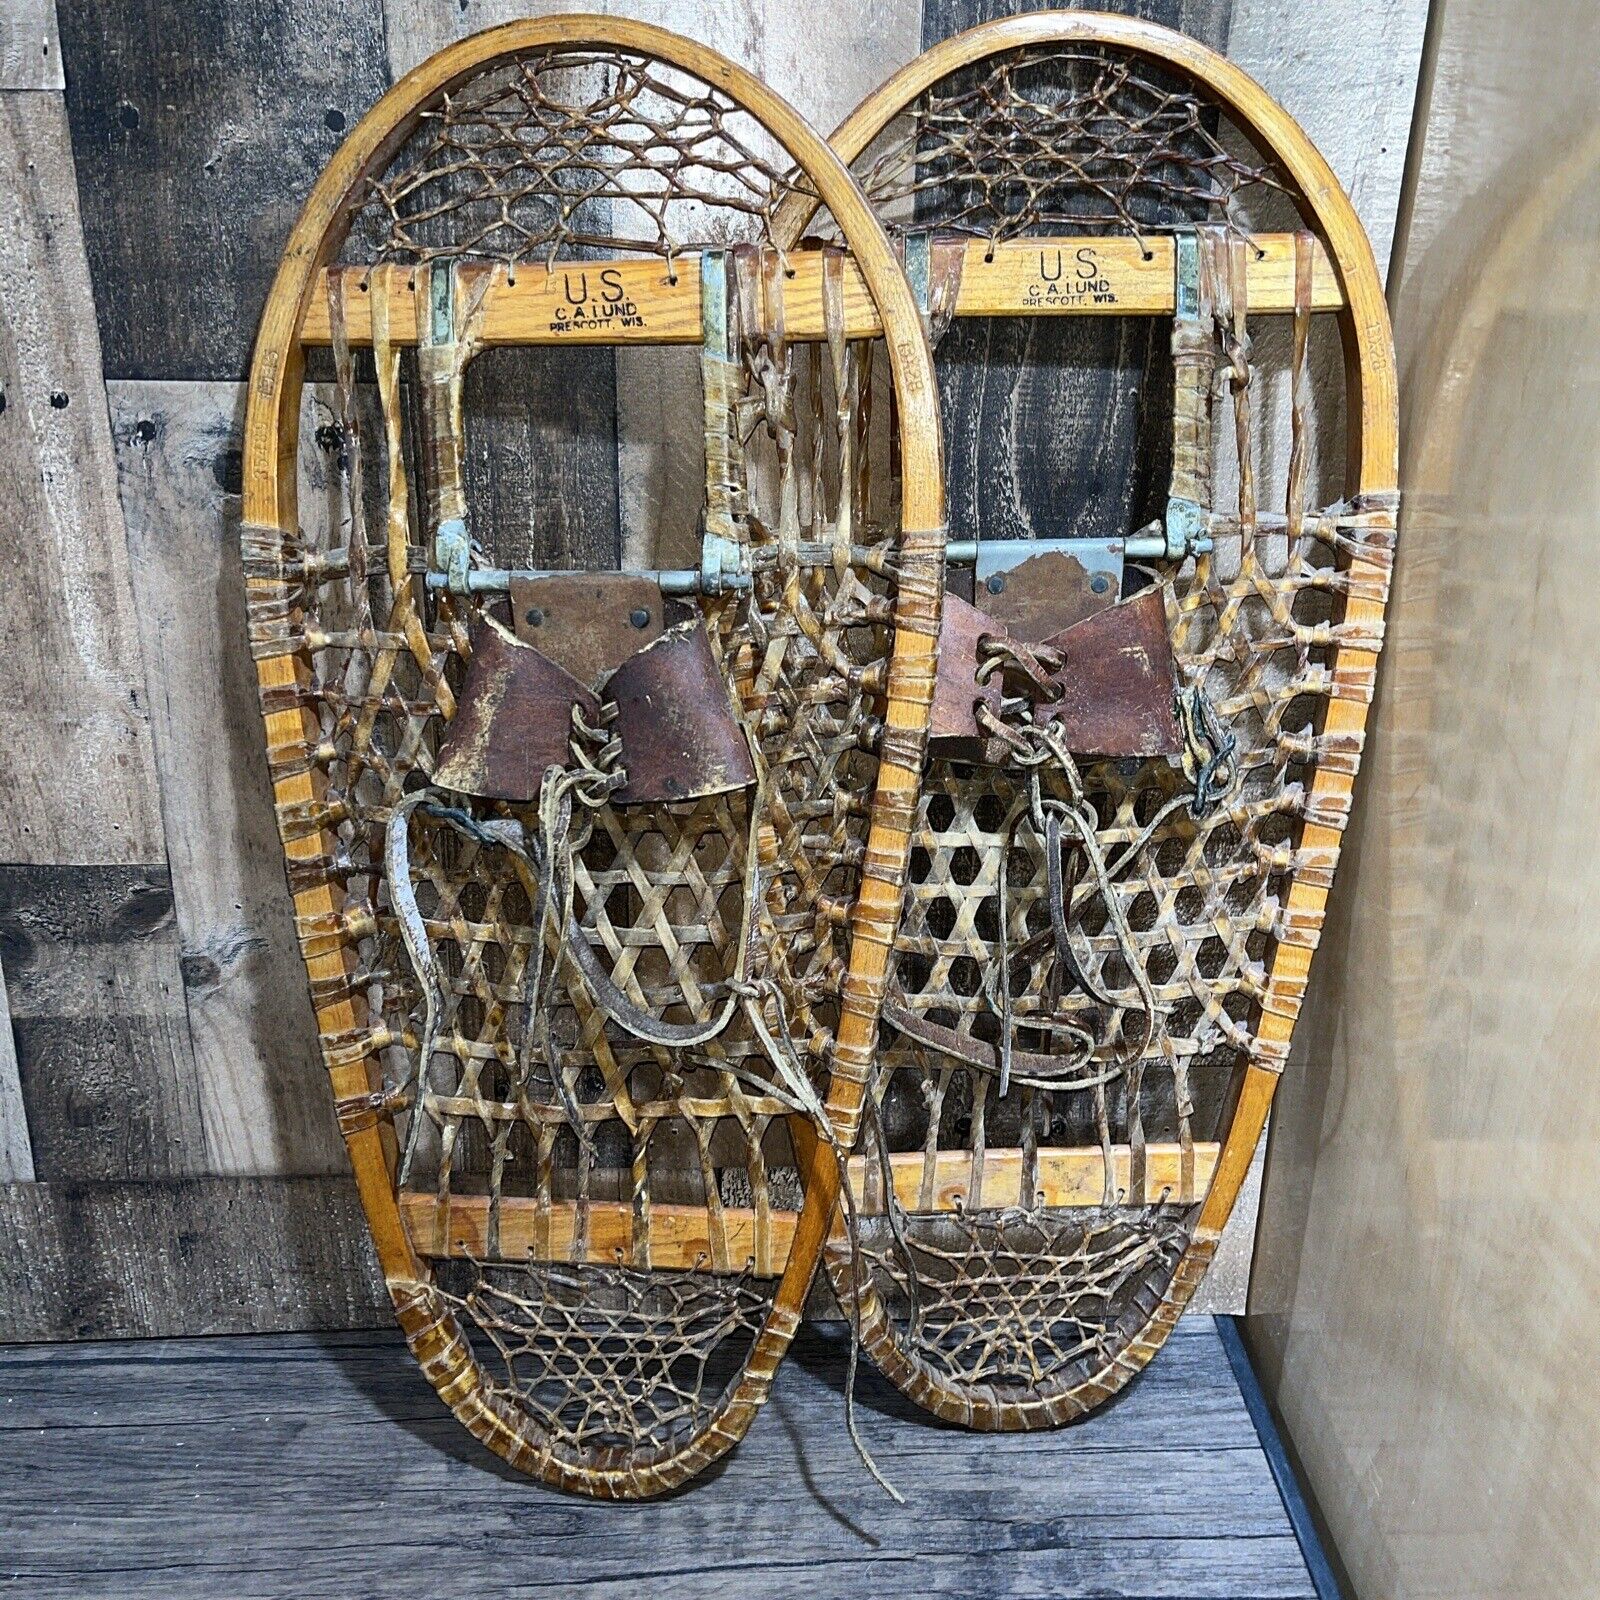 Vintage 1948 C.A. LUND US HASTINGS, MINN SnowShoes 13x28 w/Foot Straps